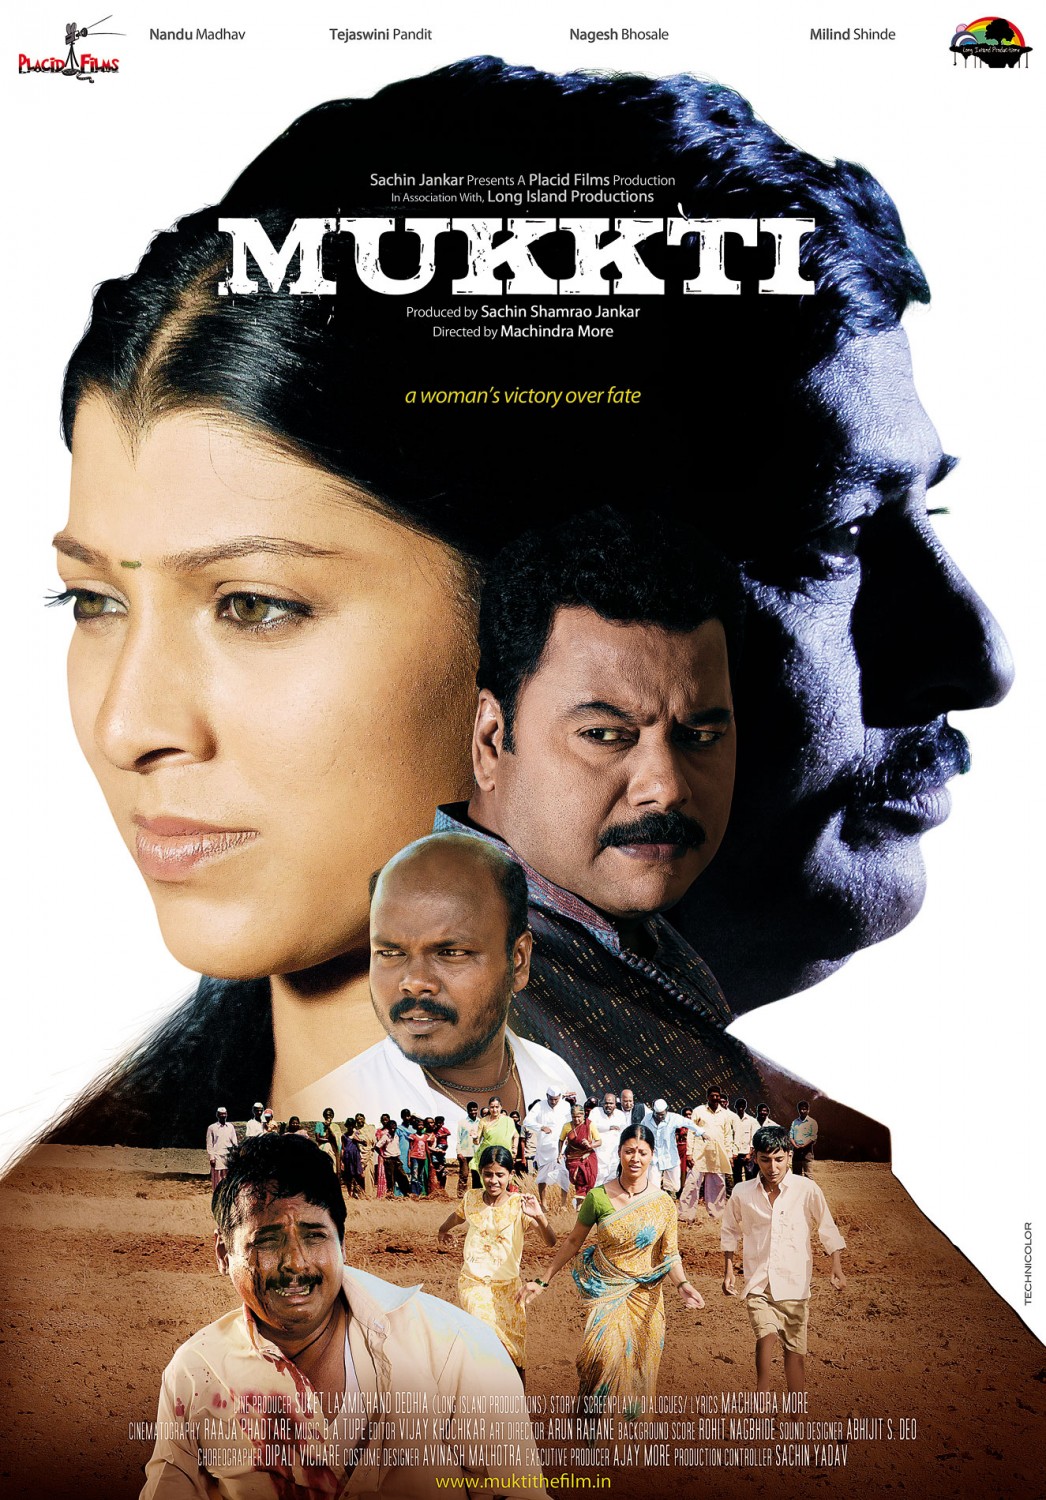 Extra Large Movie Poster Image for Mukti (#3 of 7)